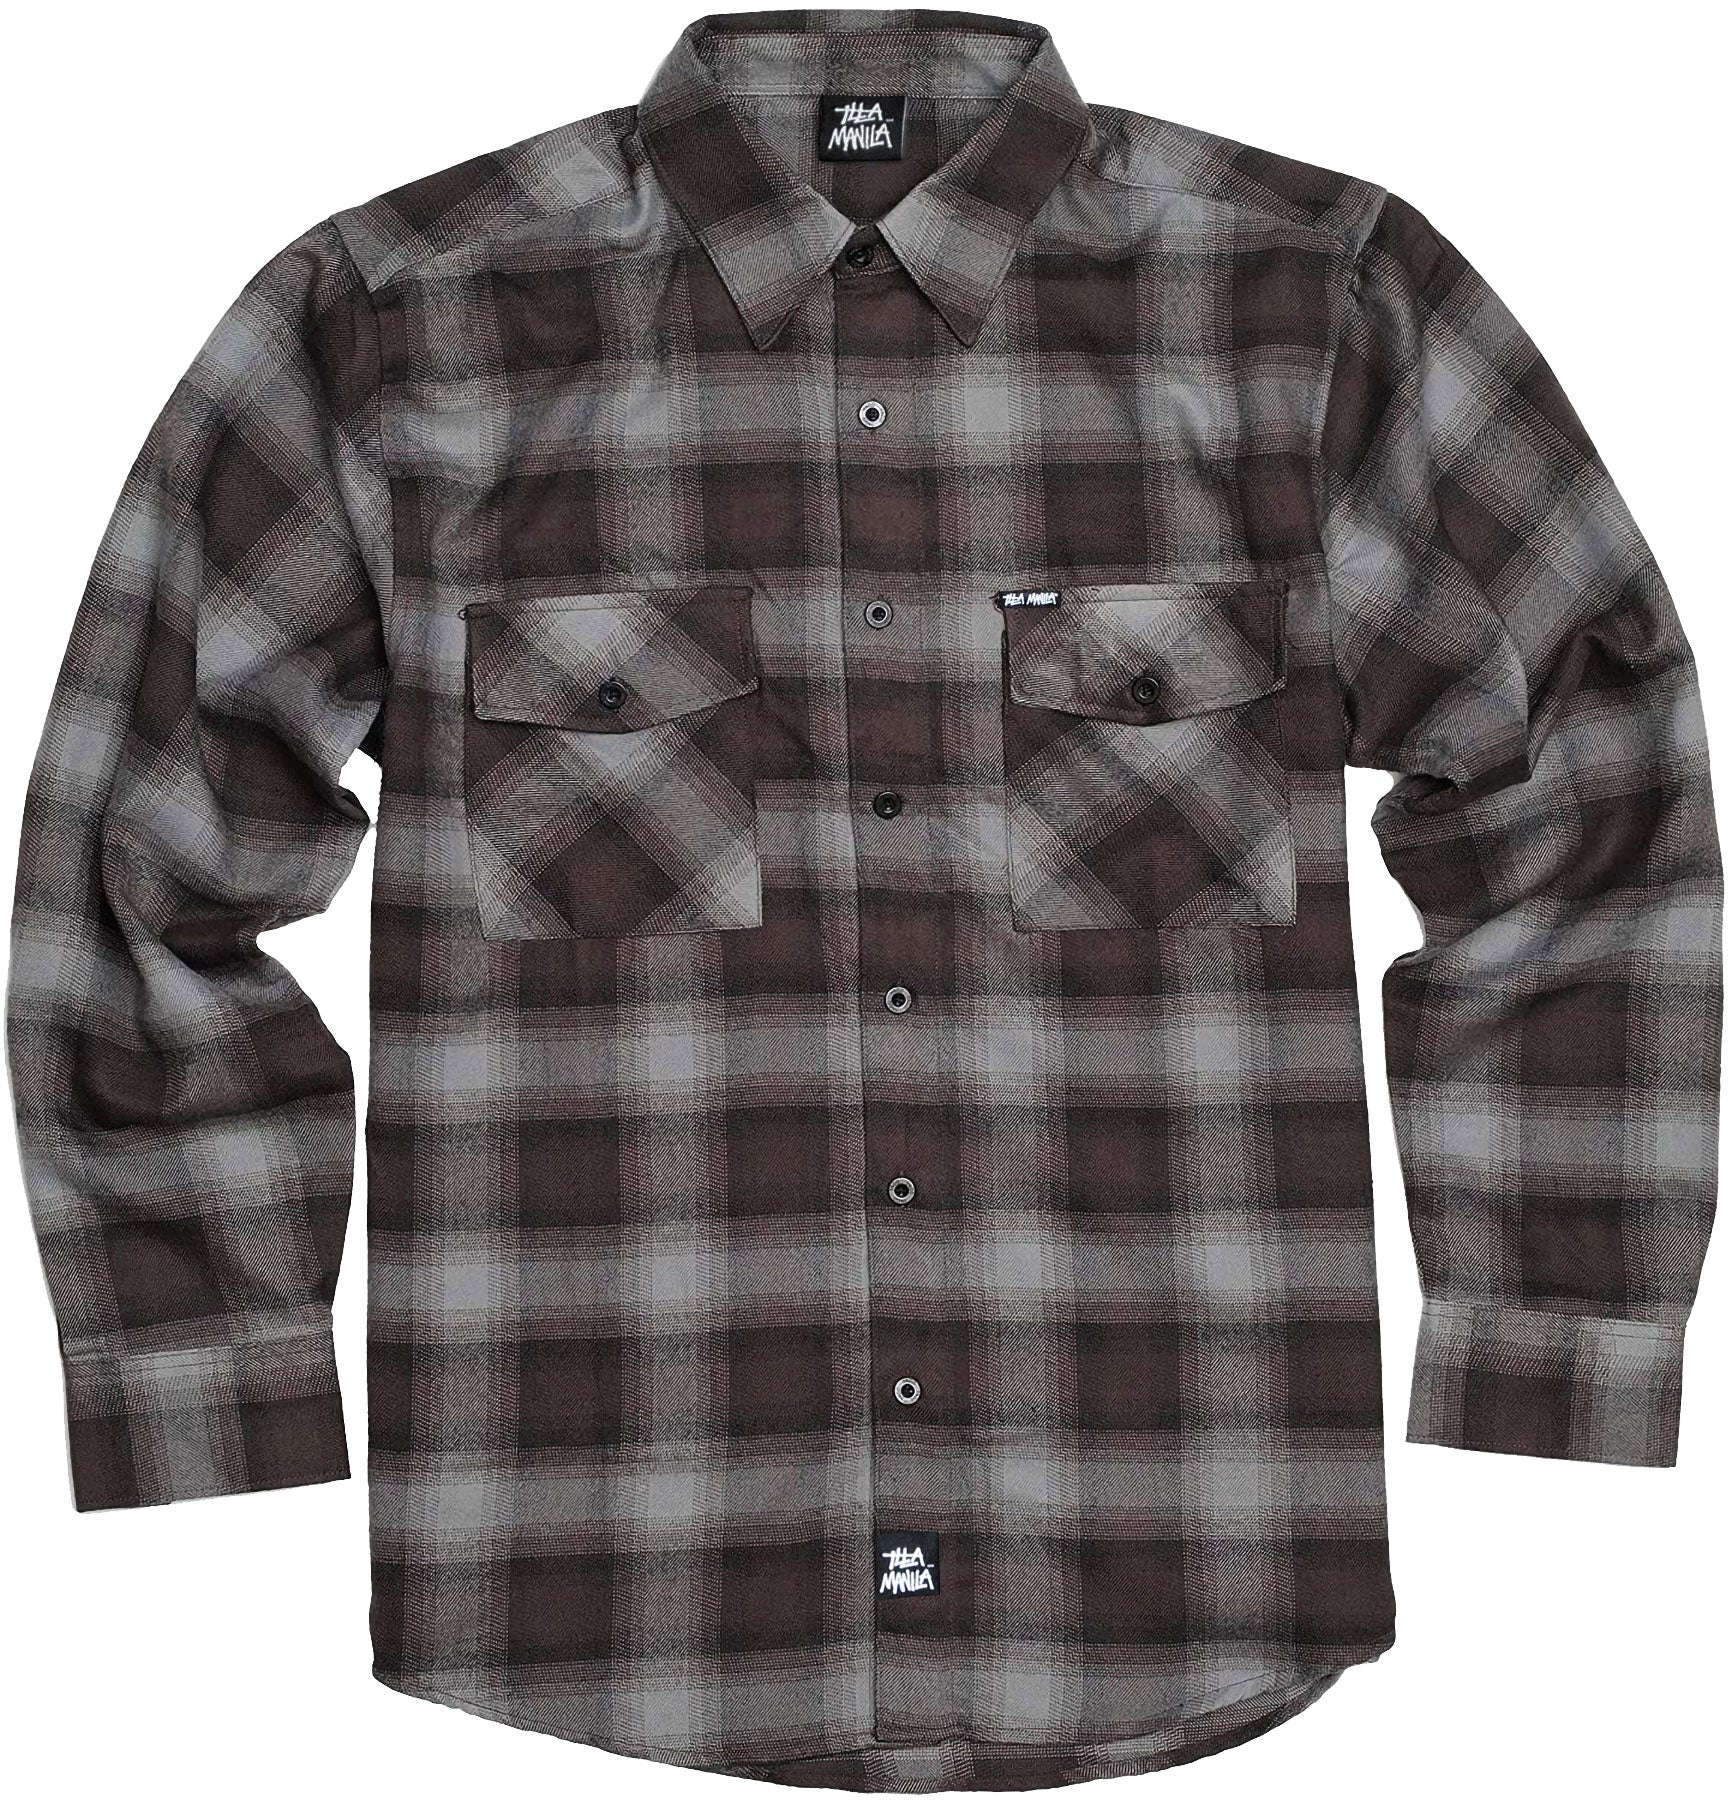 The Brown Flannel